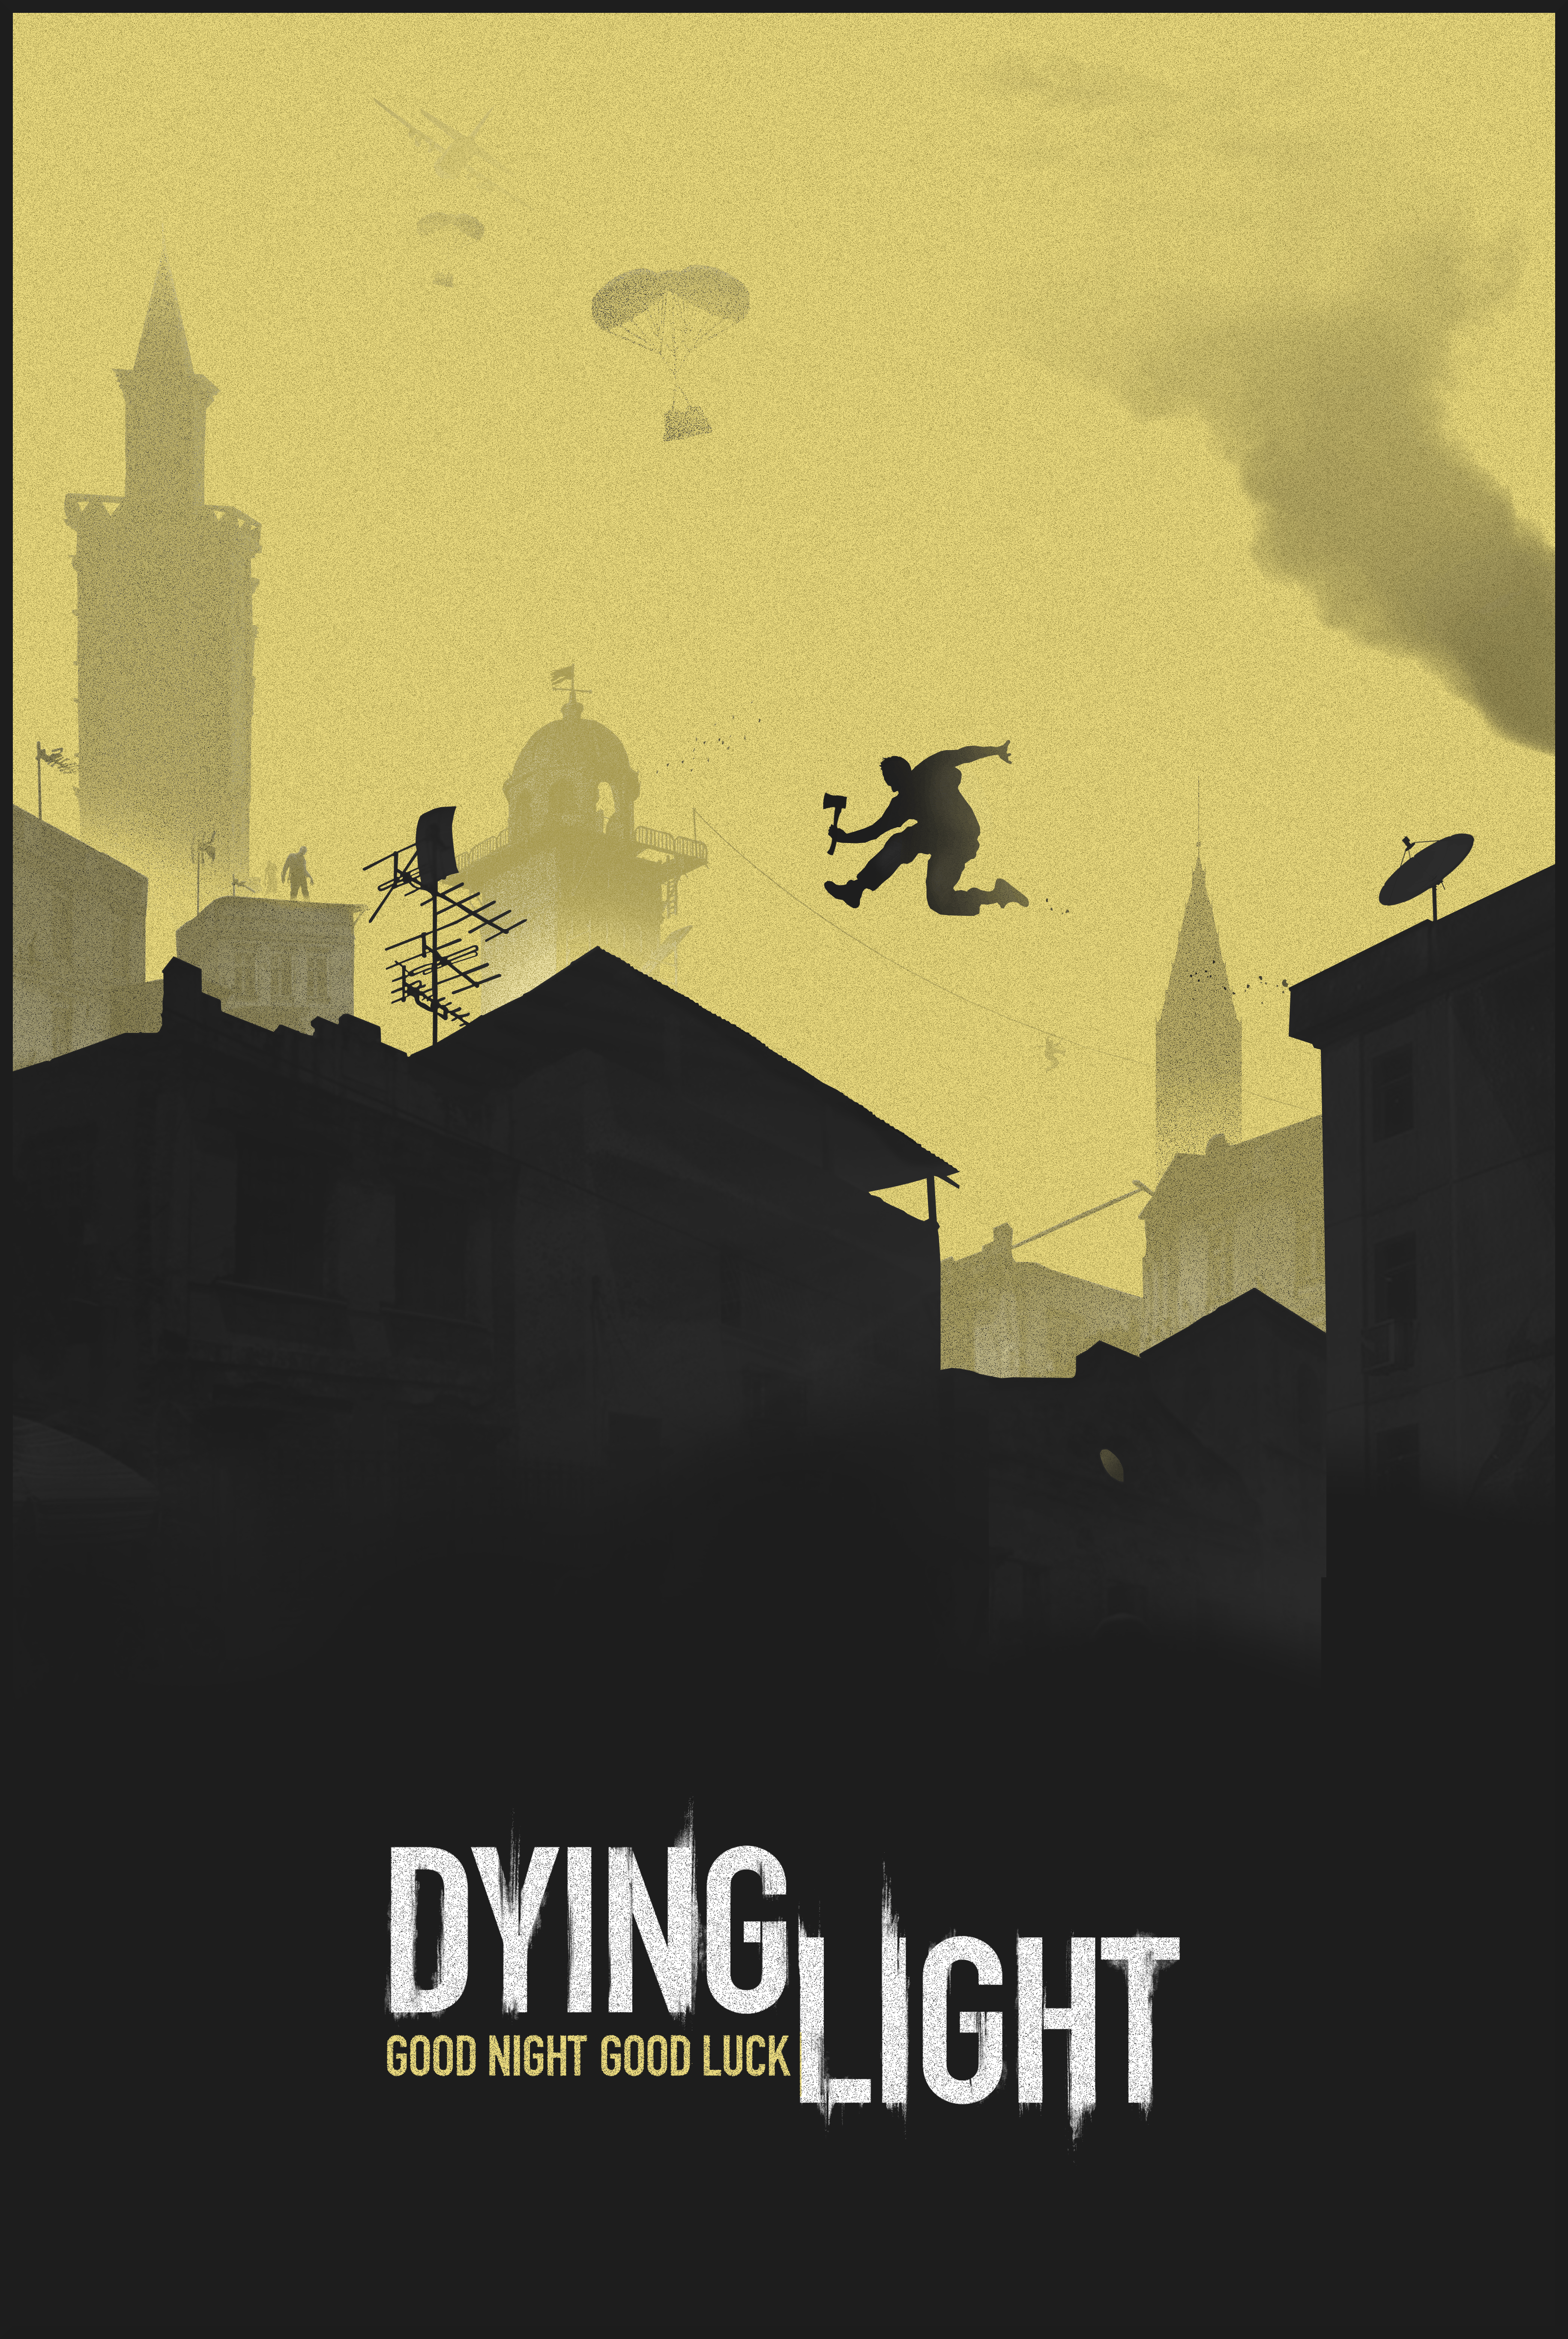 Dying Light Iphone Wallpapers Top Free Dying Light Iphone Backgrounds Wallpaperaccess